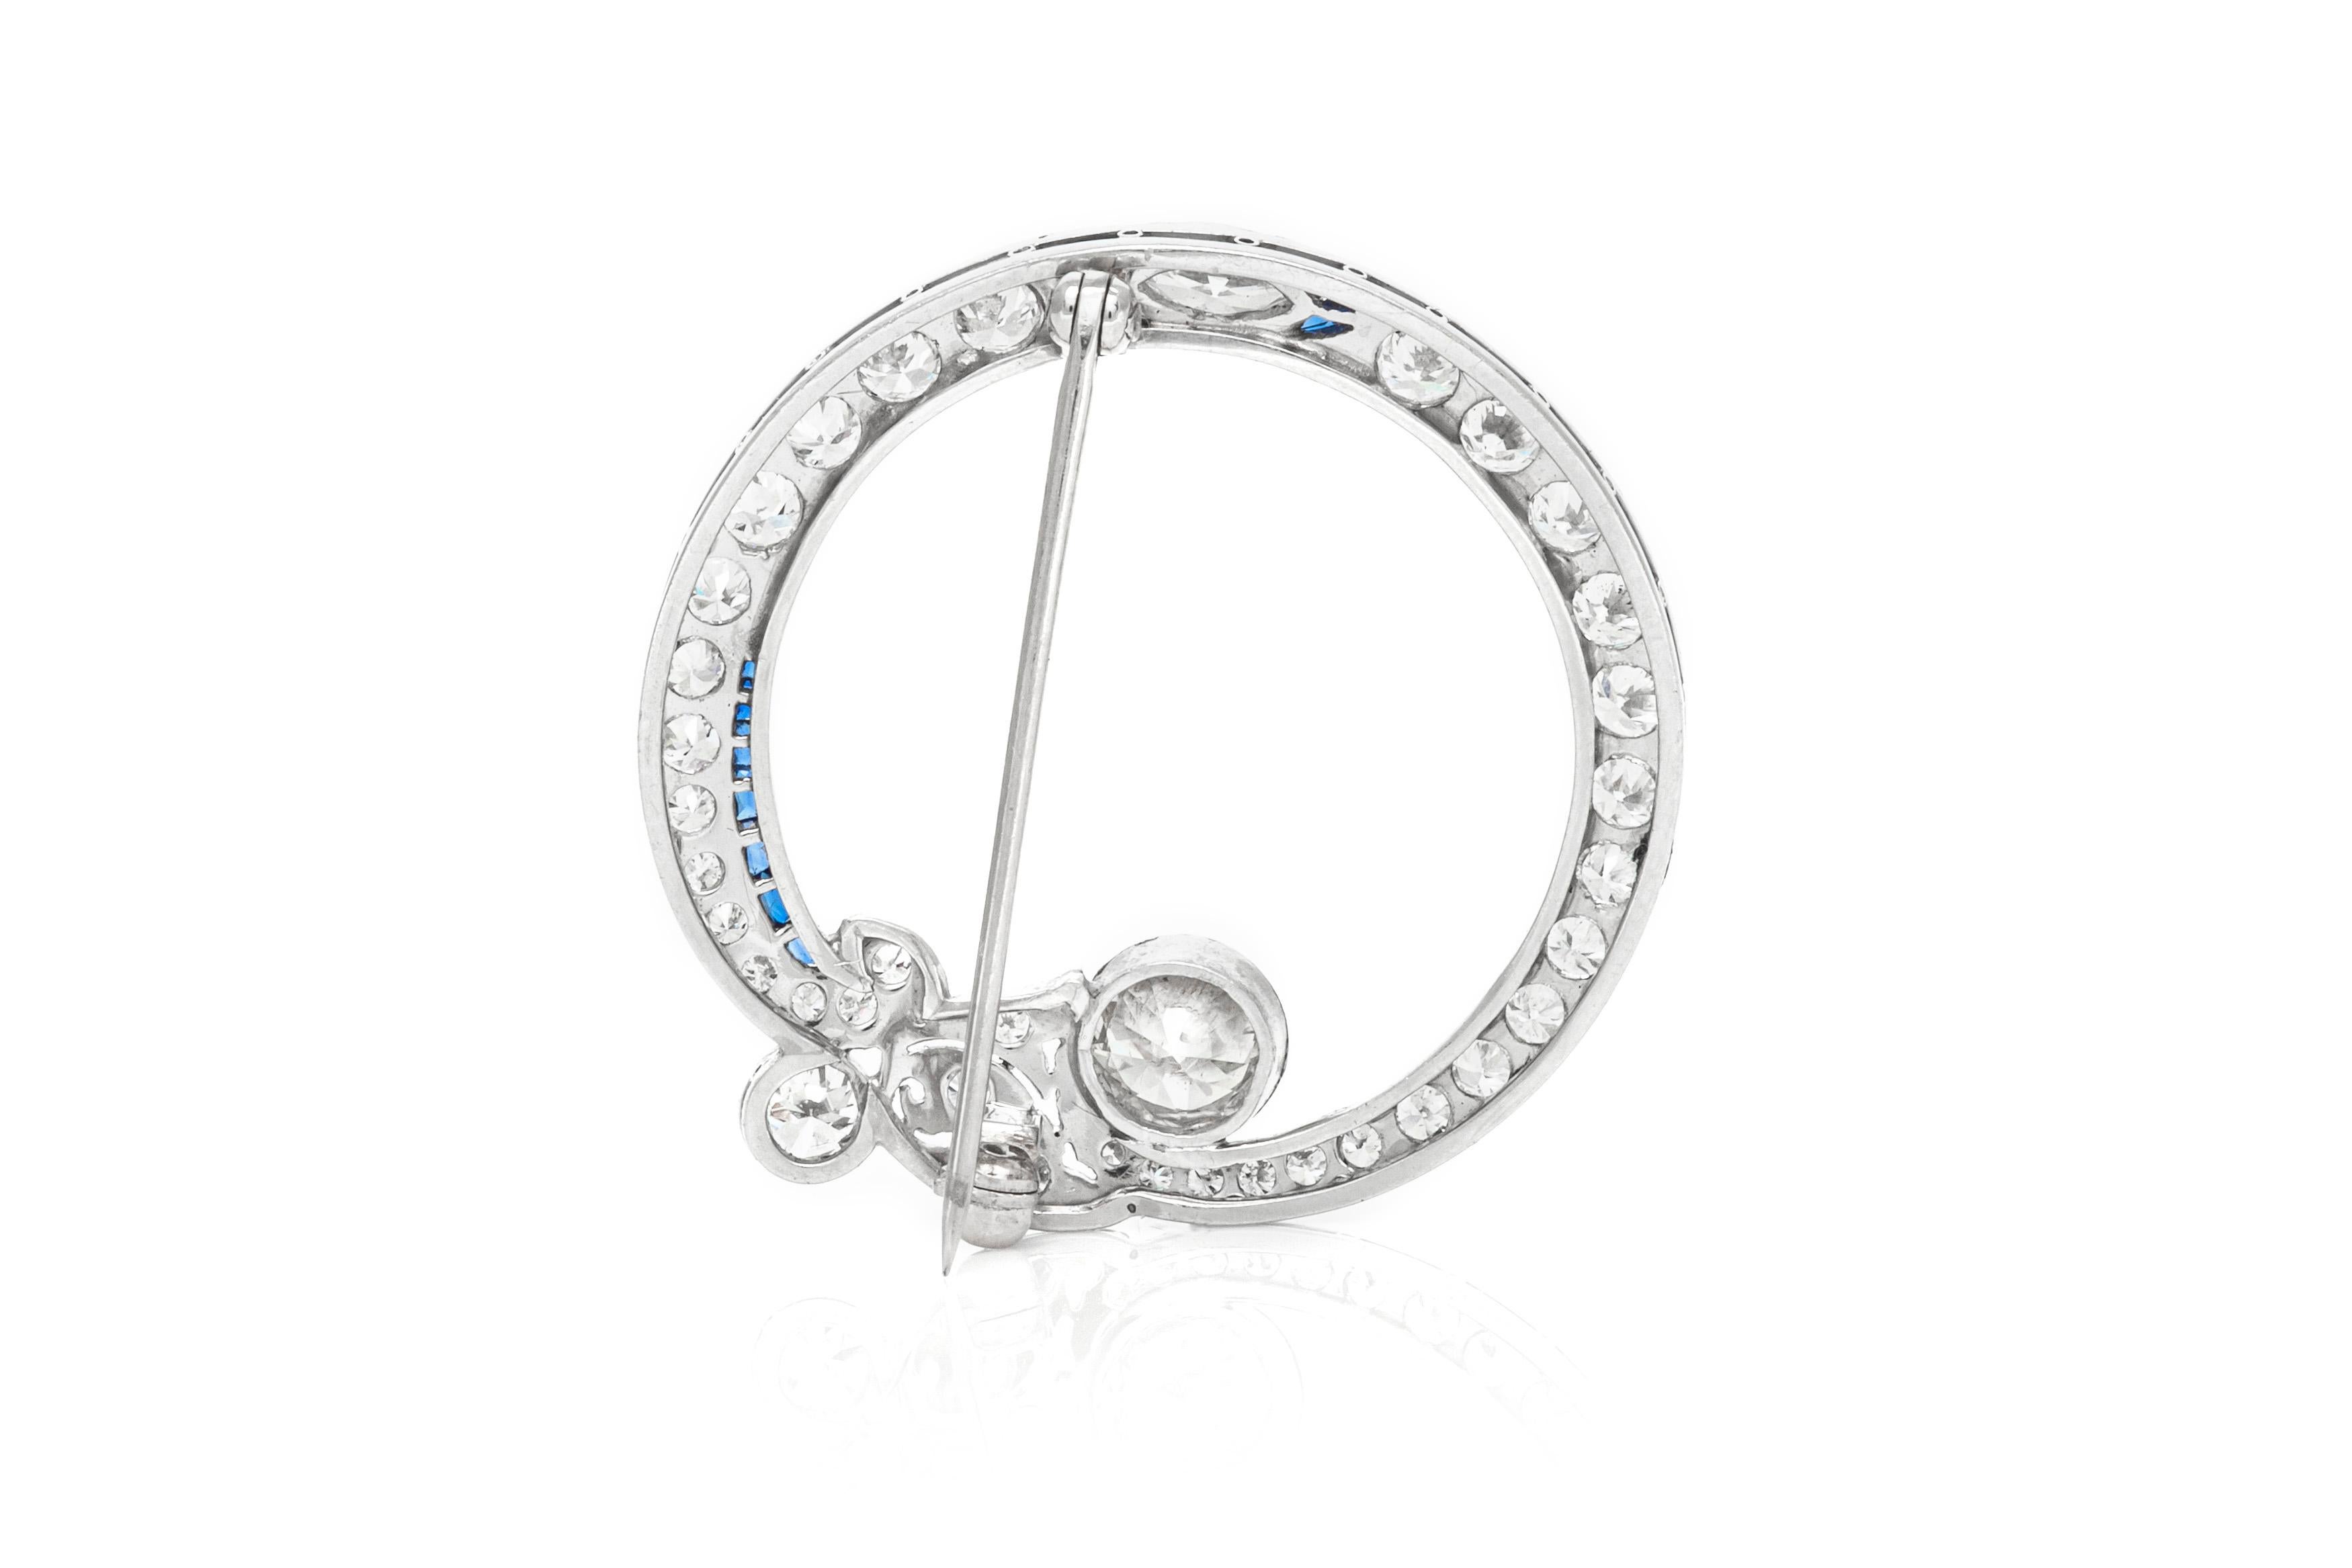 The brooch is finely crafted in platinum with diamonds weighing total of 3.25 carat and sapphire.